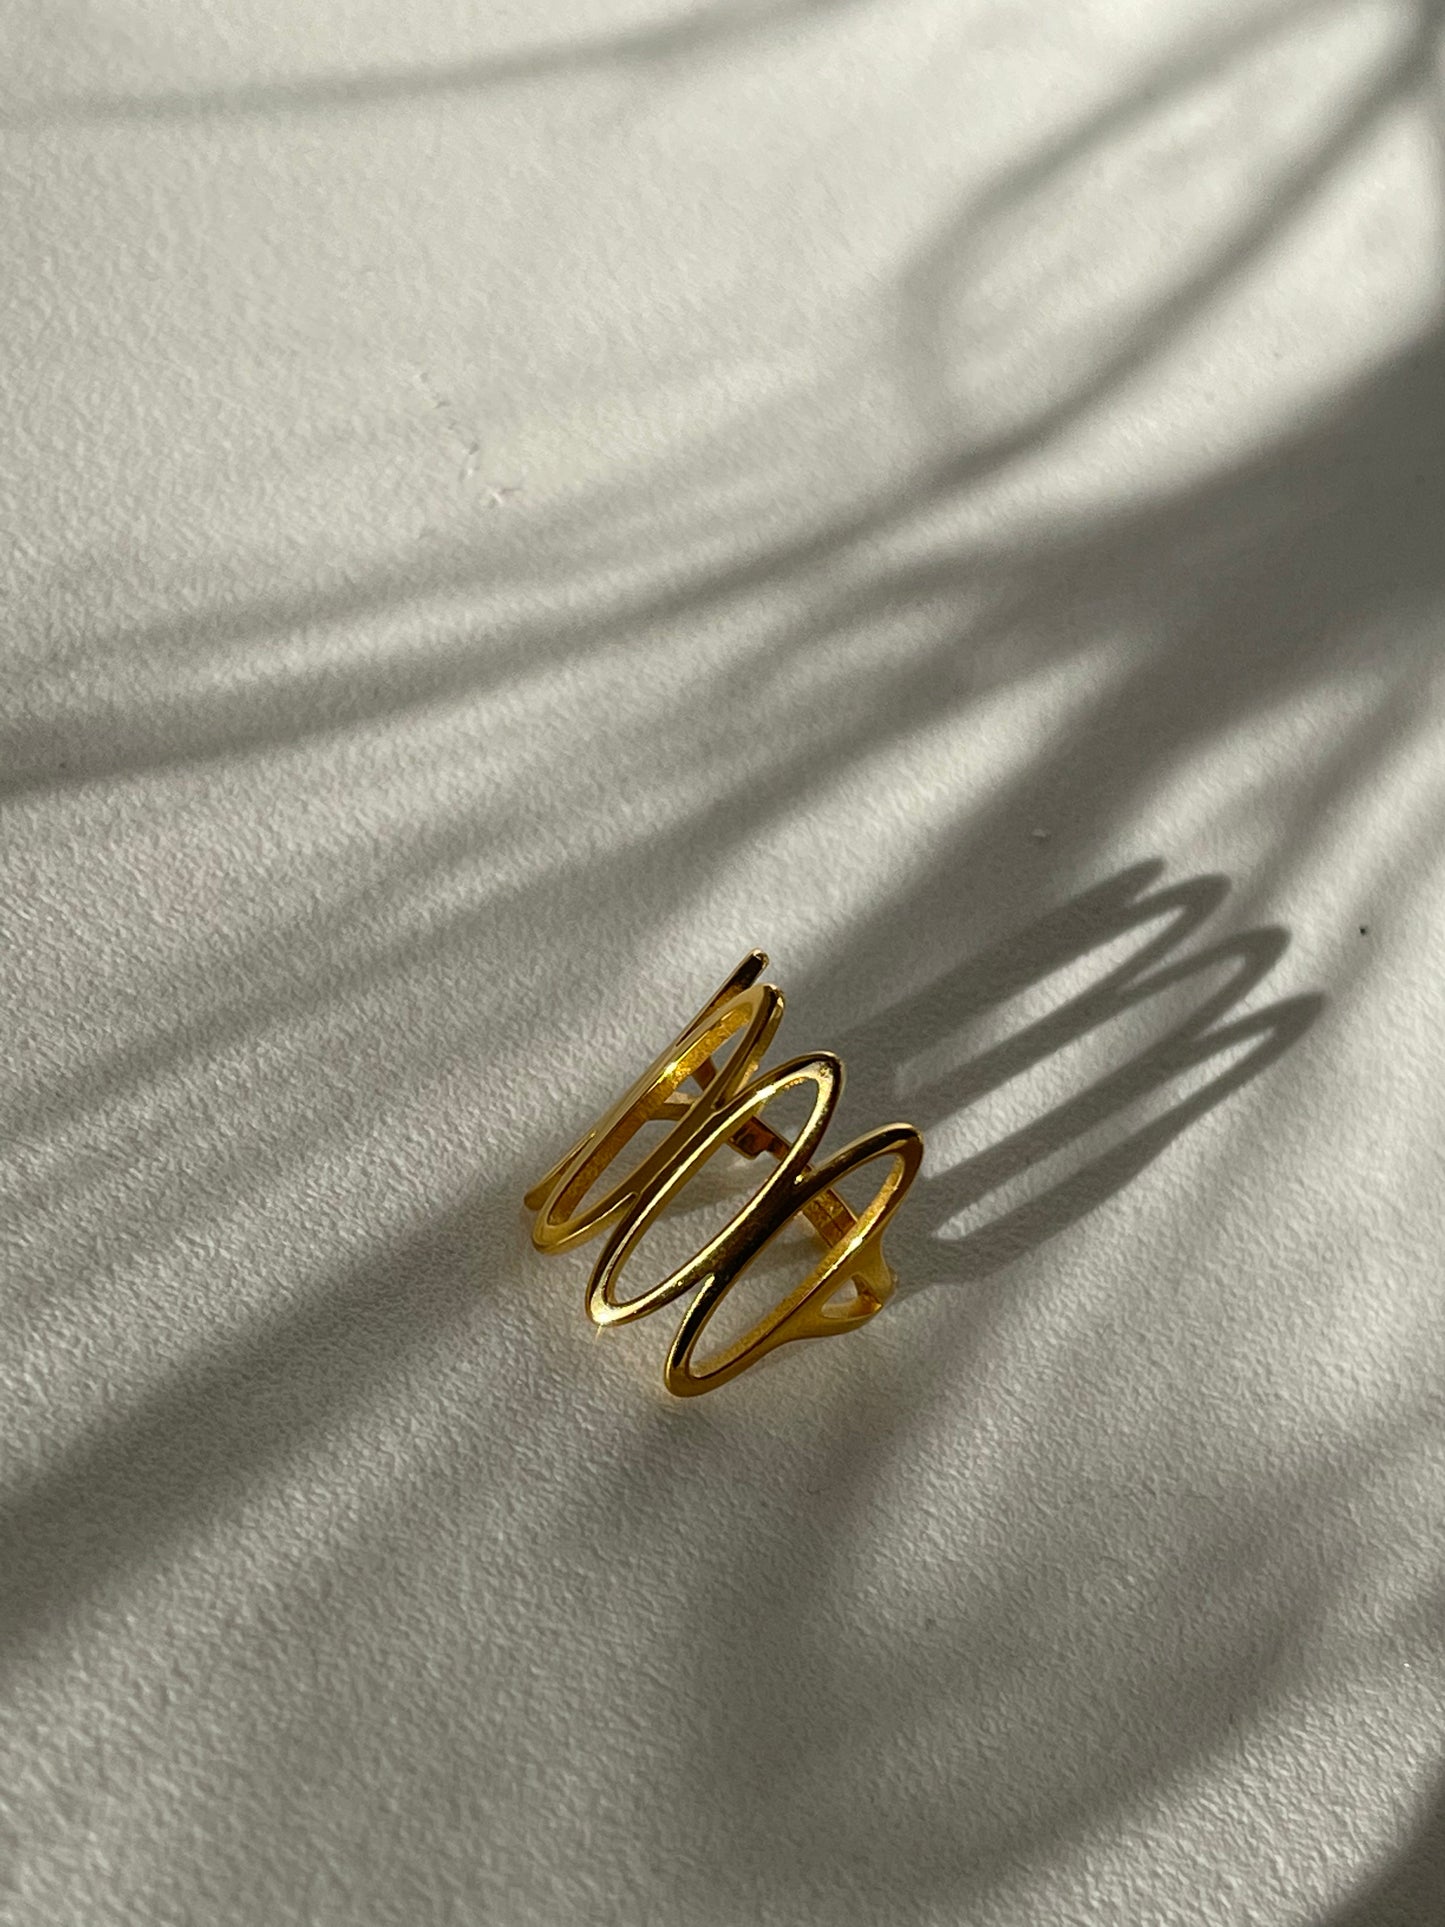 Gated Stainless Steel Ring In 18k Gold Plated